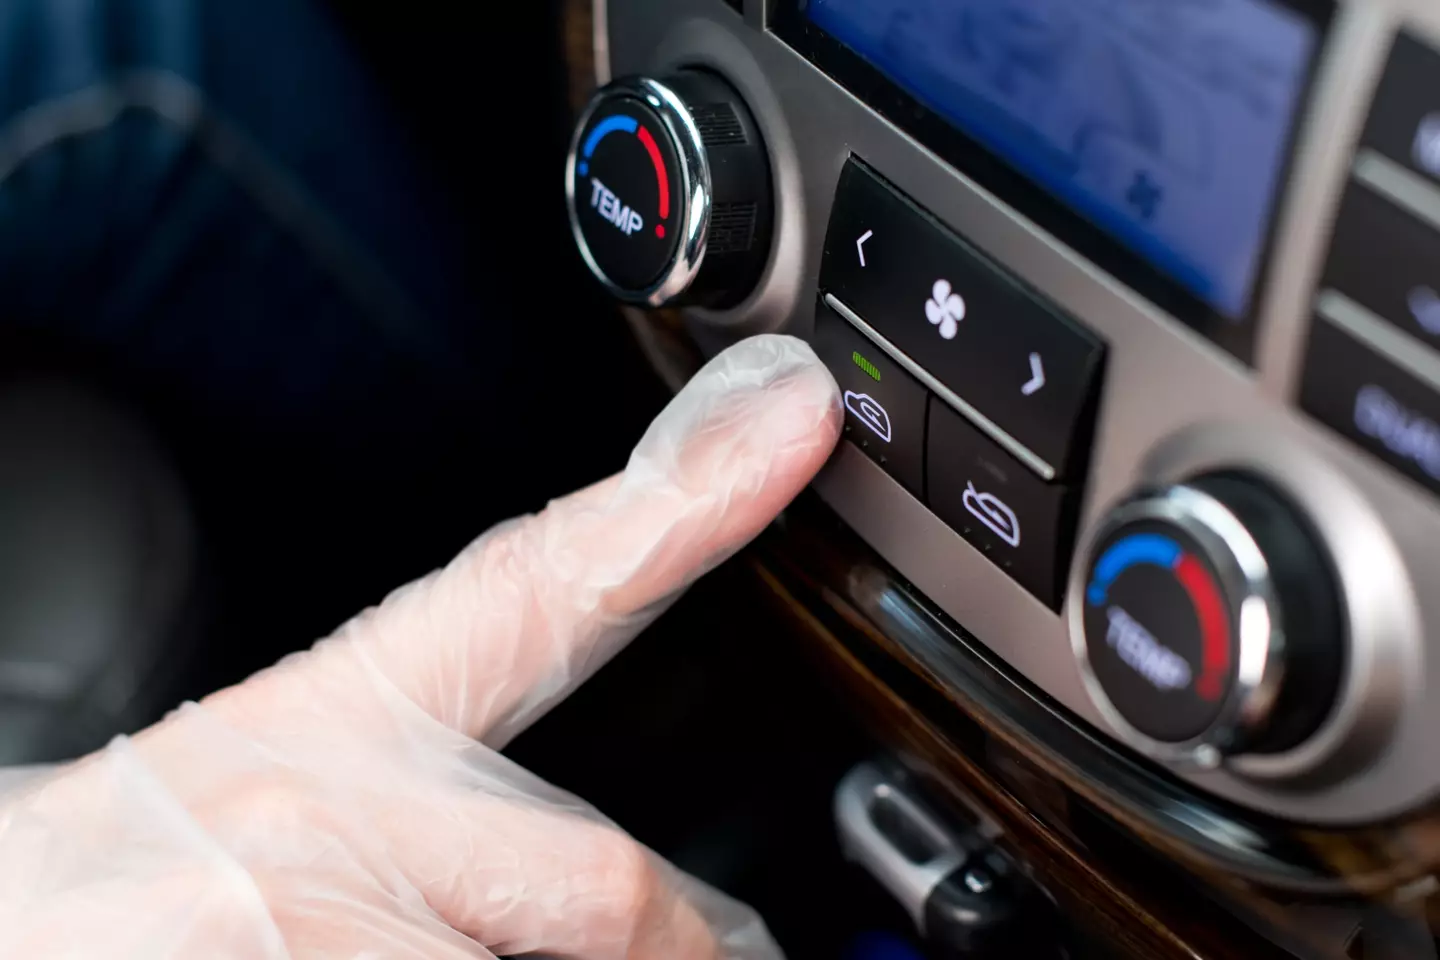 Car experts have warned against pushing the air-recirculation button.